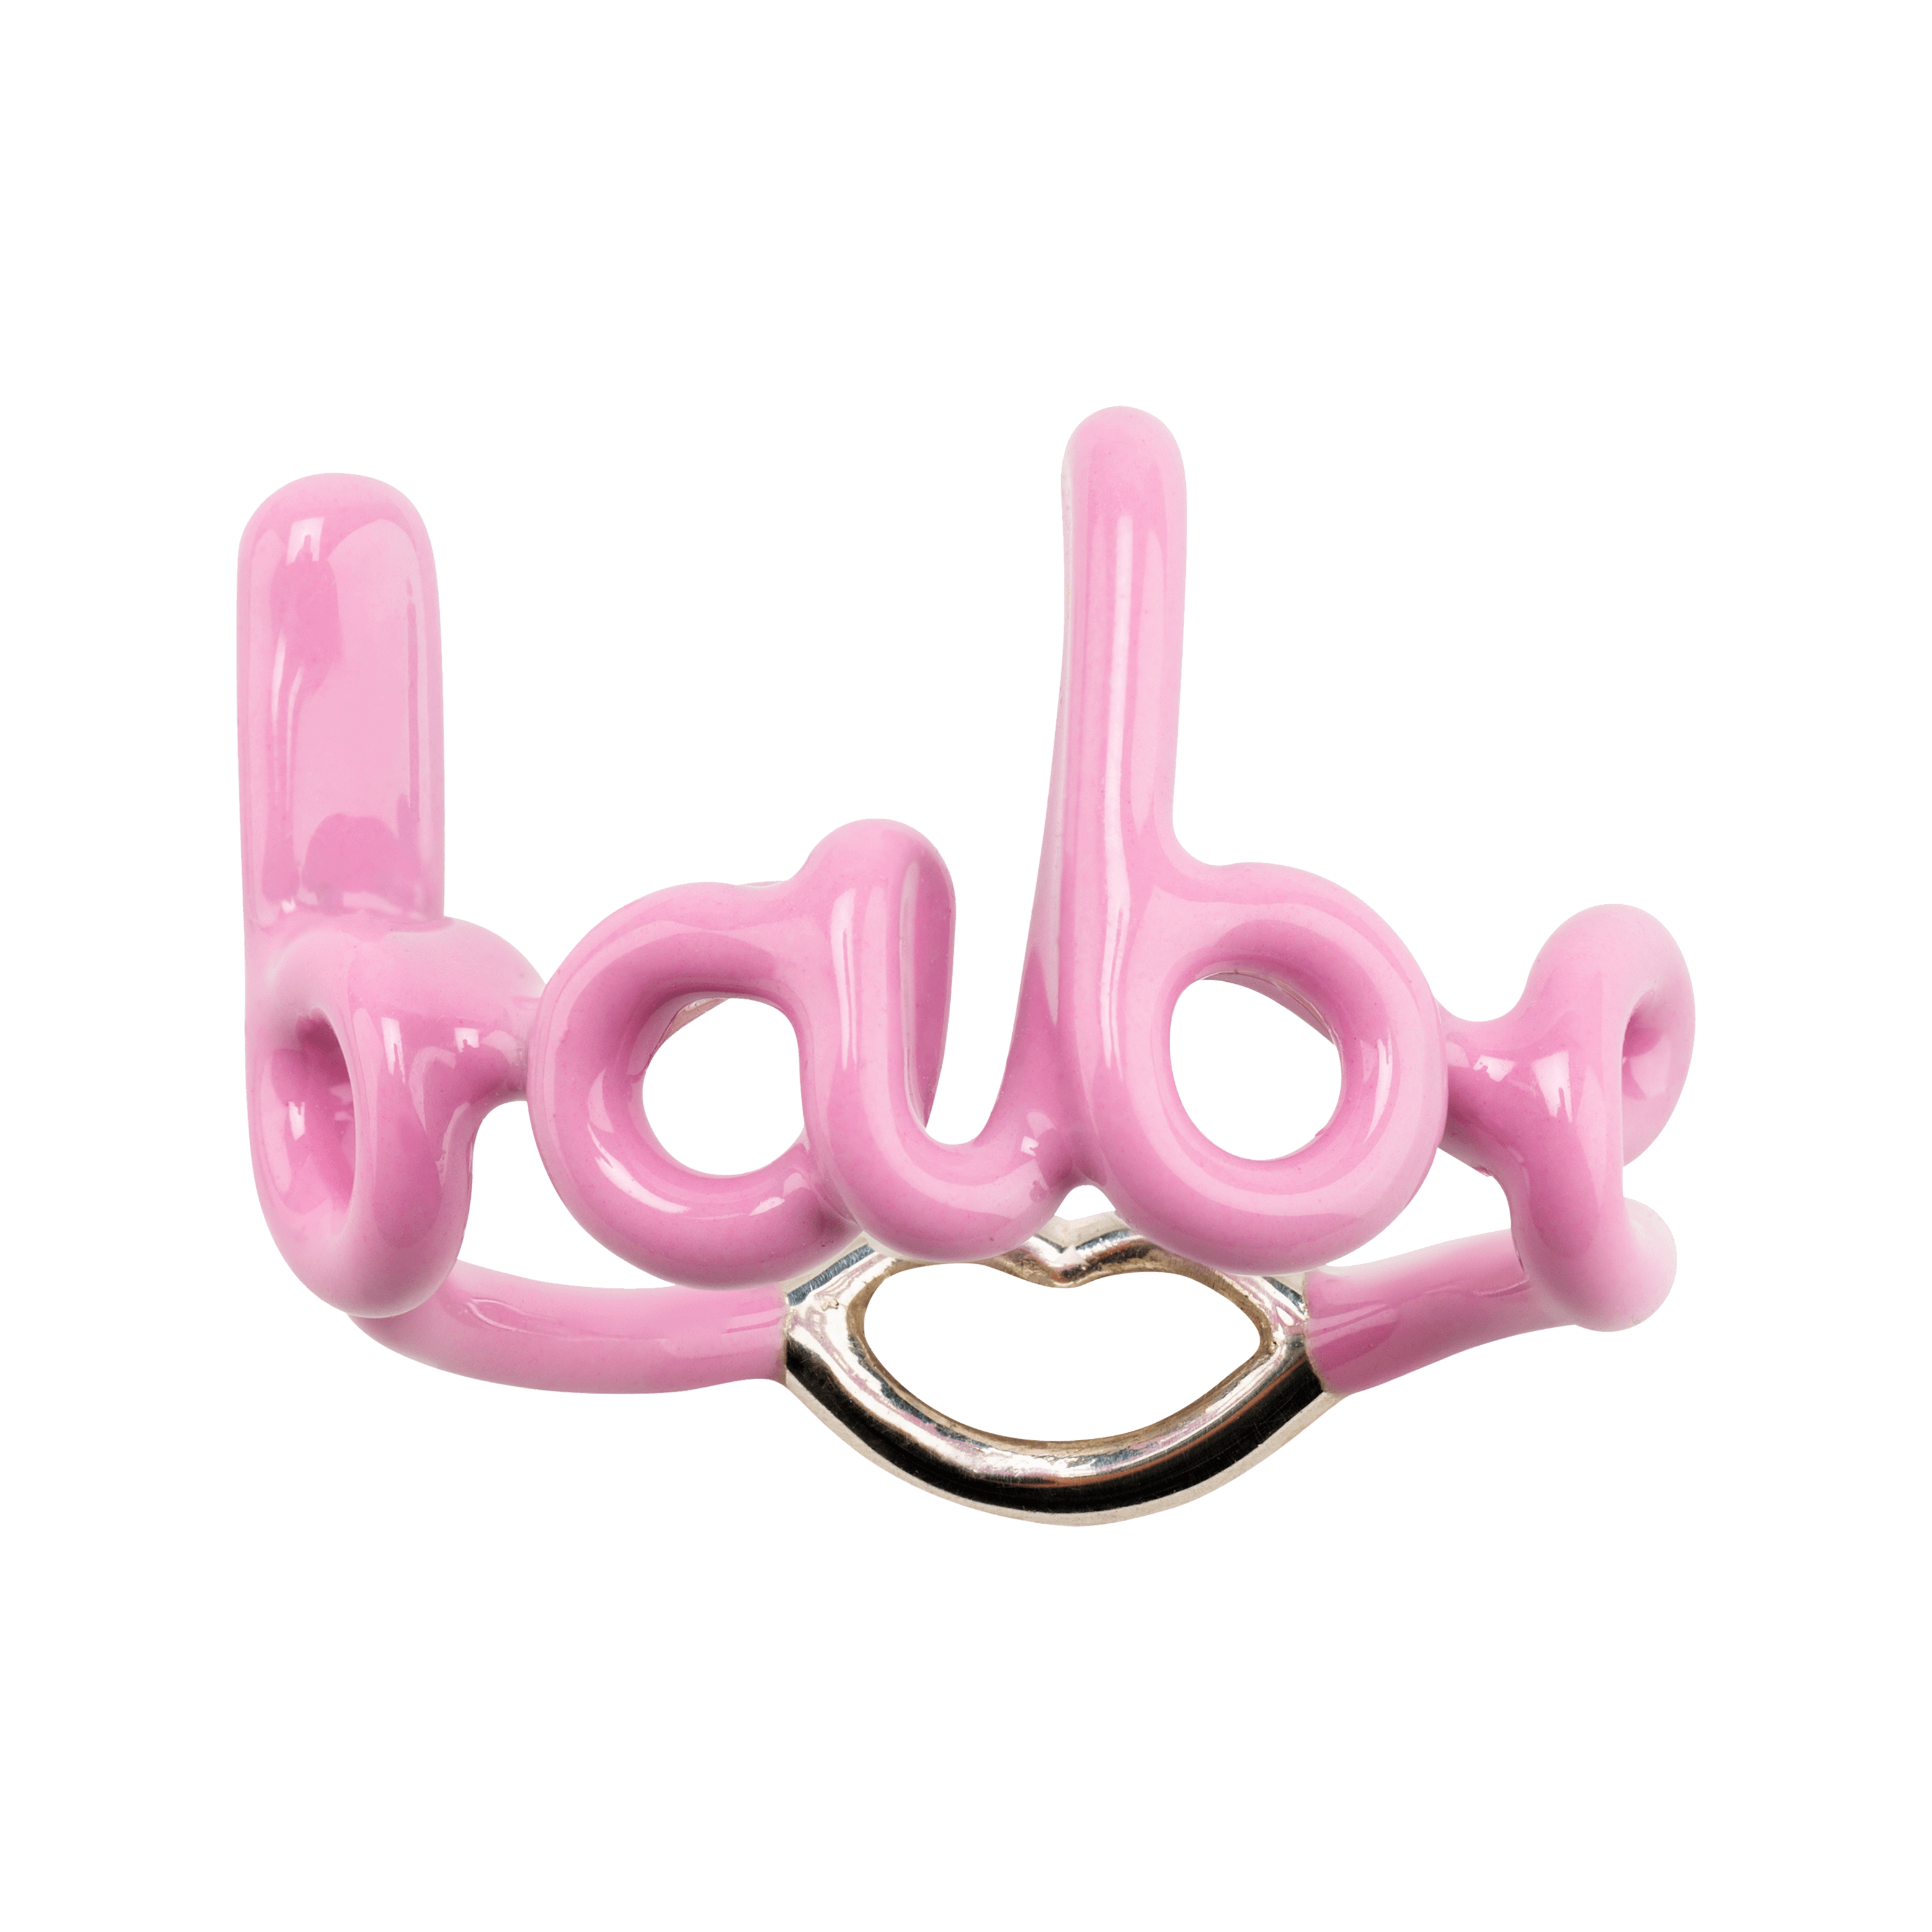 Babe Hotscripts silver and pink enamel ring front view